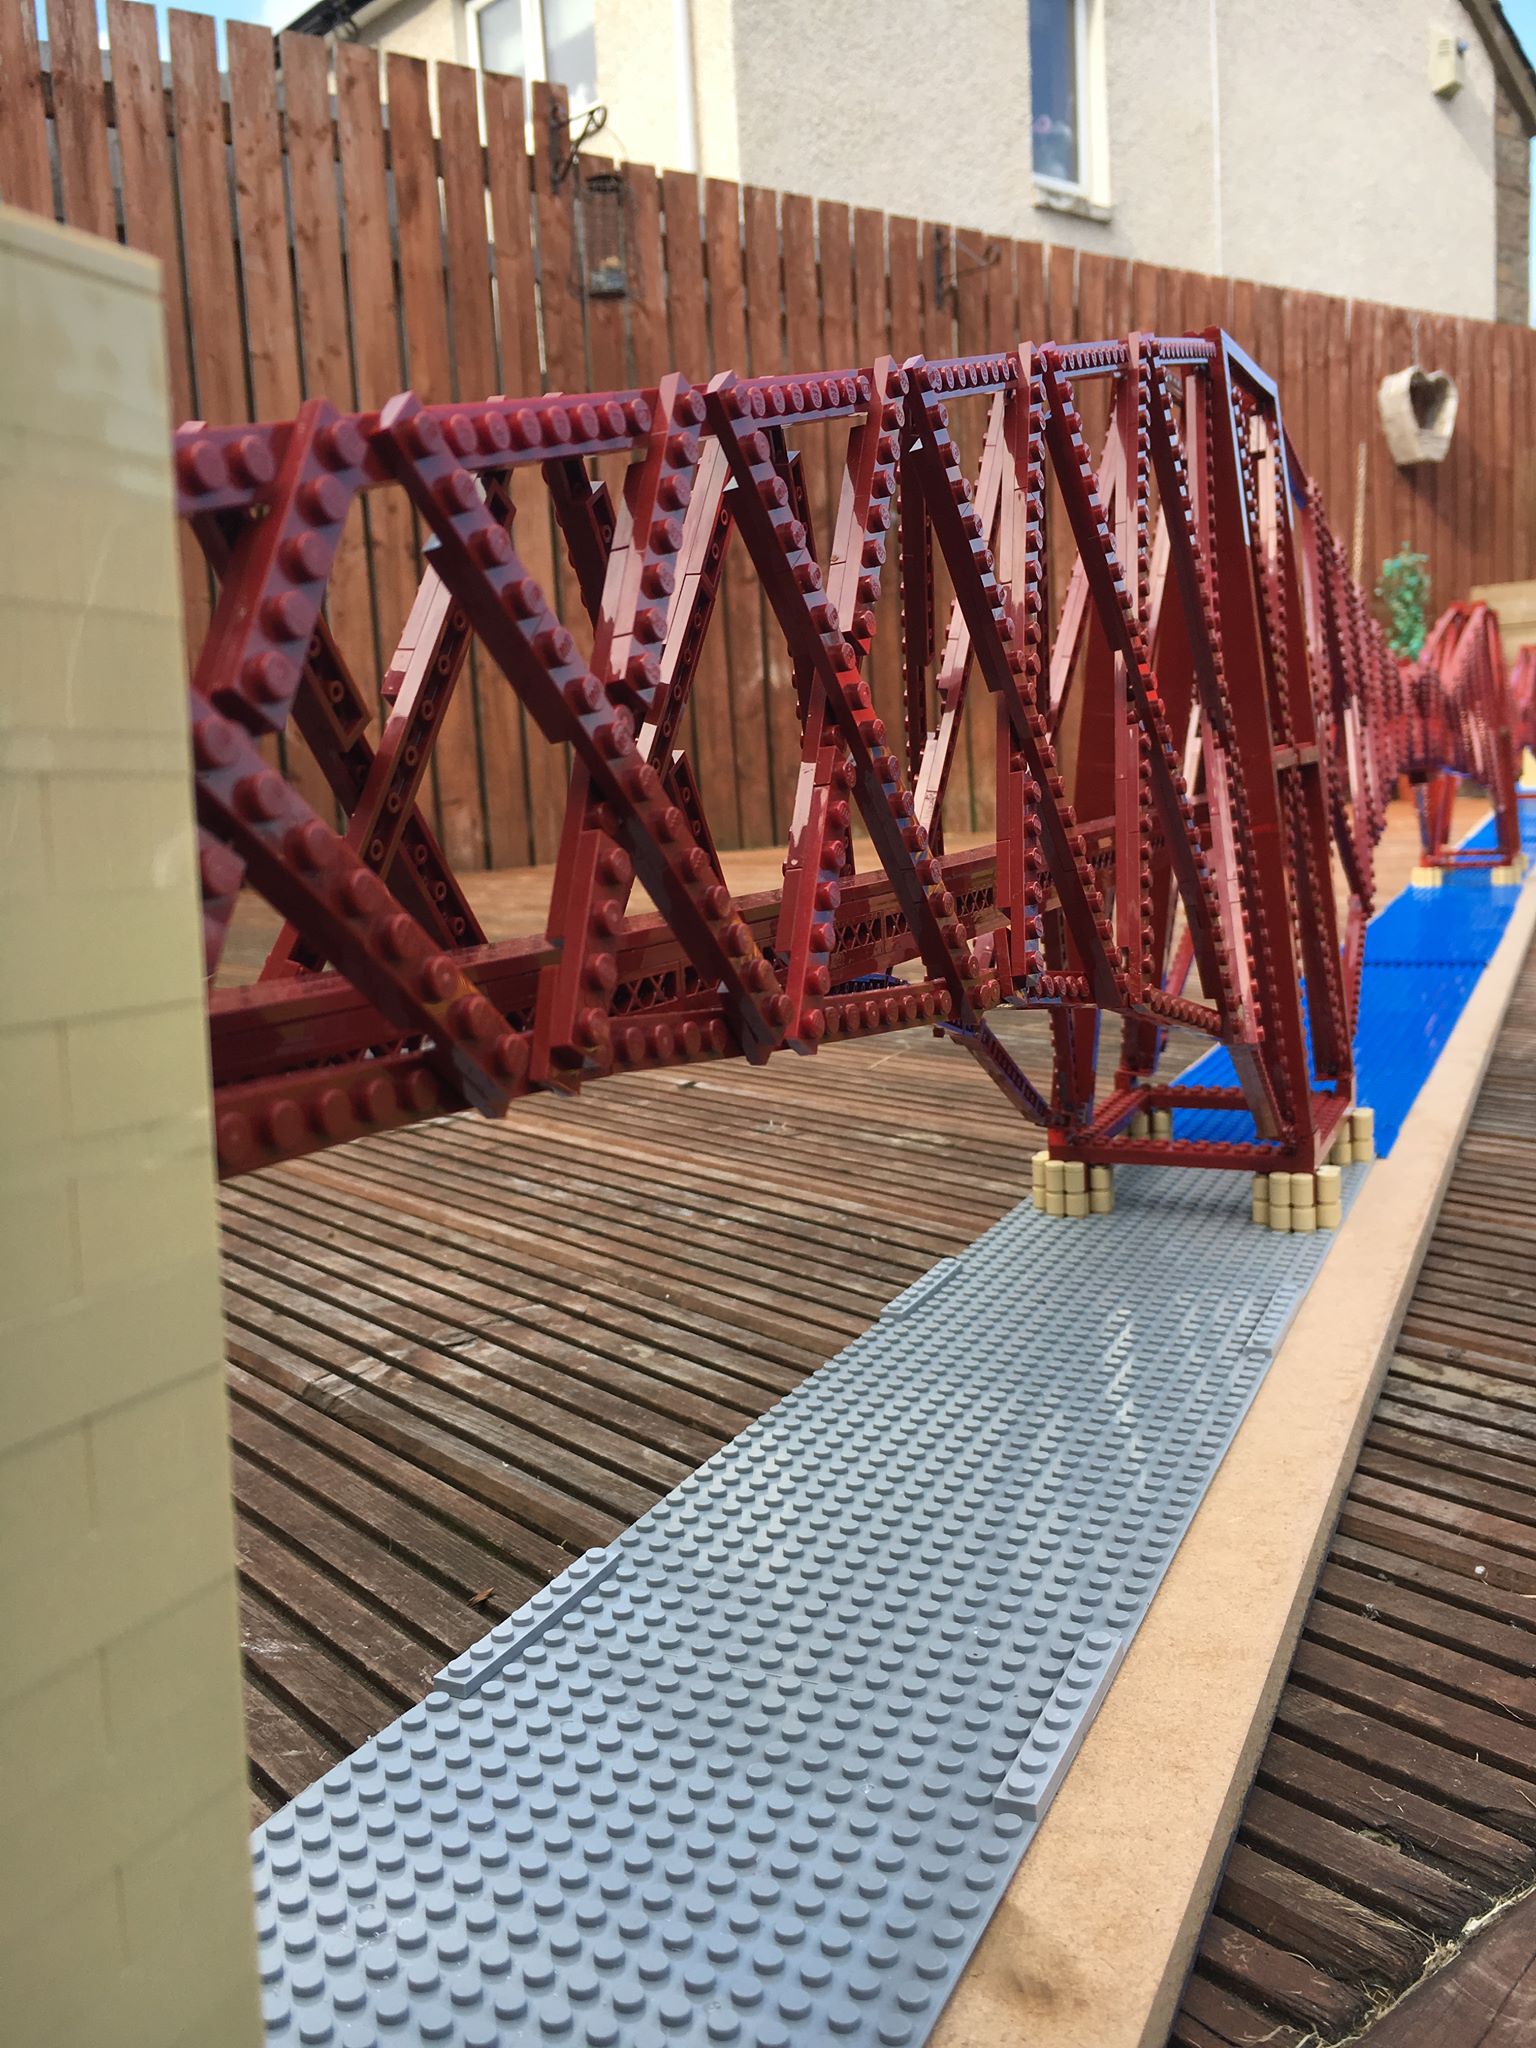 And finally... Engineer completes 4.7m Lego model of Forth Bridge